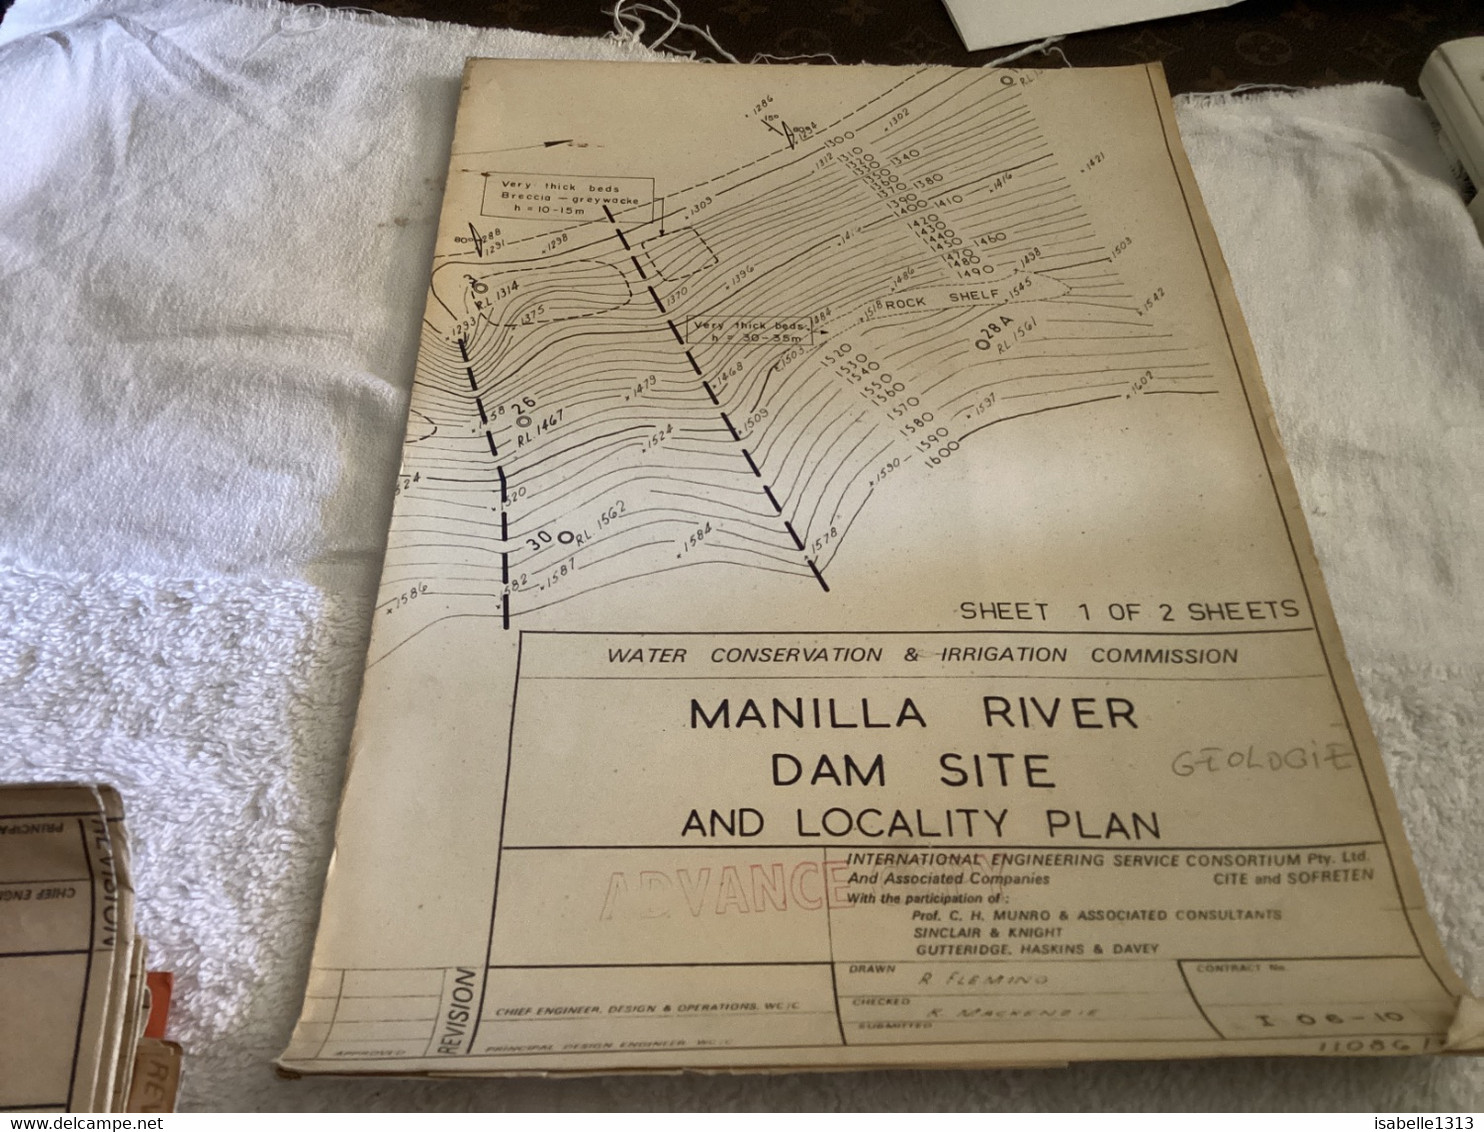 WATER CONSERVATION & IRRIGATION COMMISSION MANILLA RIVER UPSTREAM SITE FILL TYPE DAM. LAYOUT AND CROSS SECTIONS - Arbeitsbeschaffung